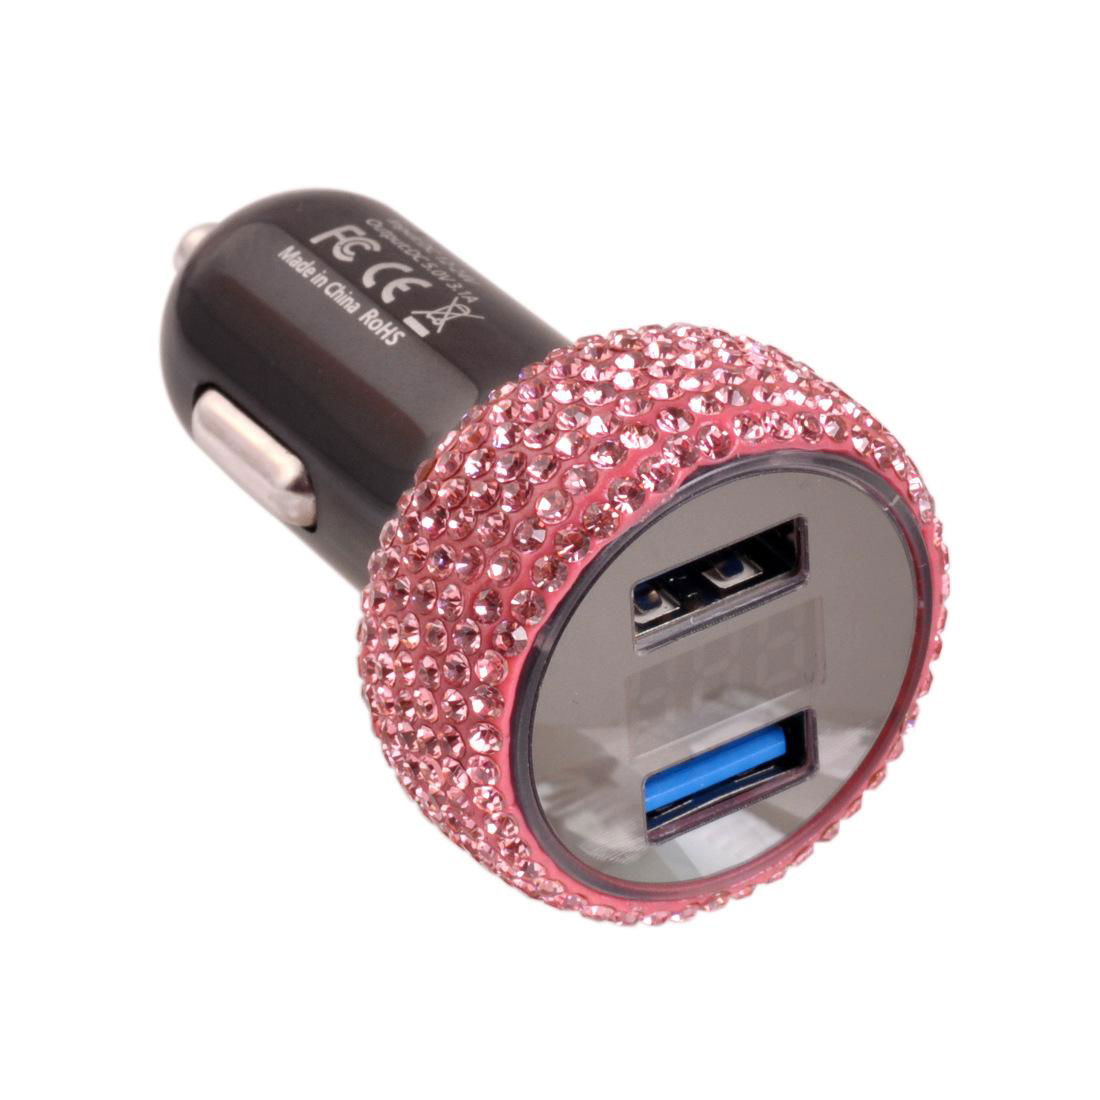 Voltage Display Bling Dual USB Car Quick Charge 3.0 Crystal Cigarette Adapter 5